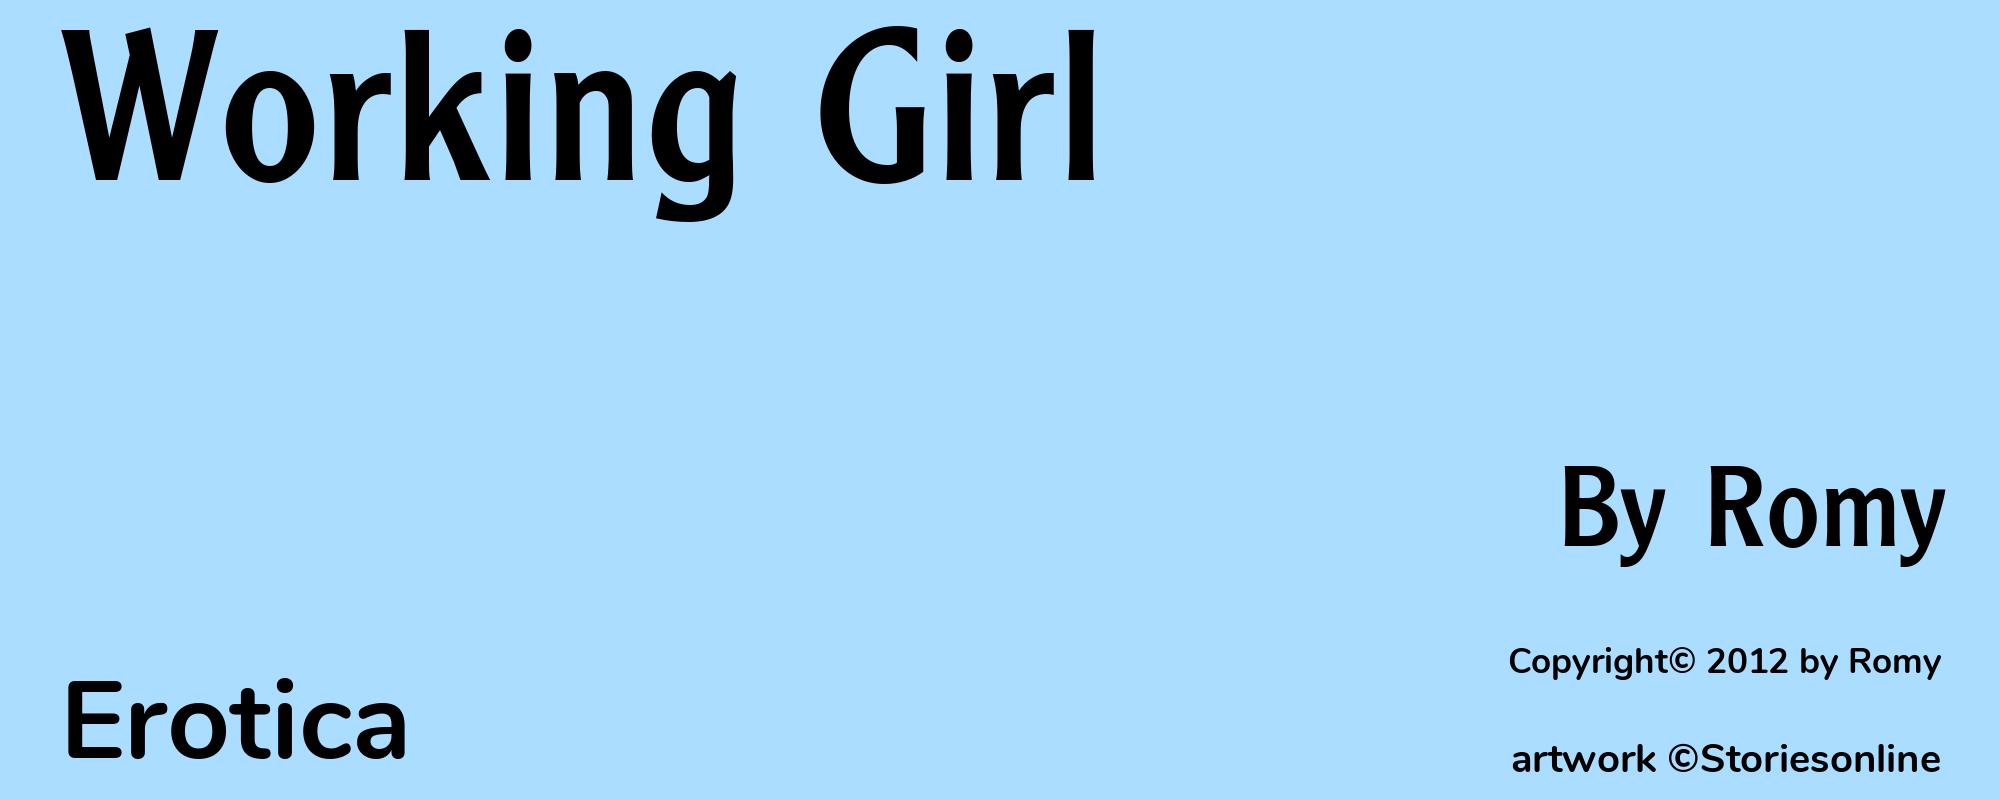 Working Girl - Cover